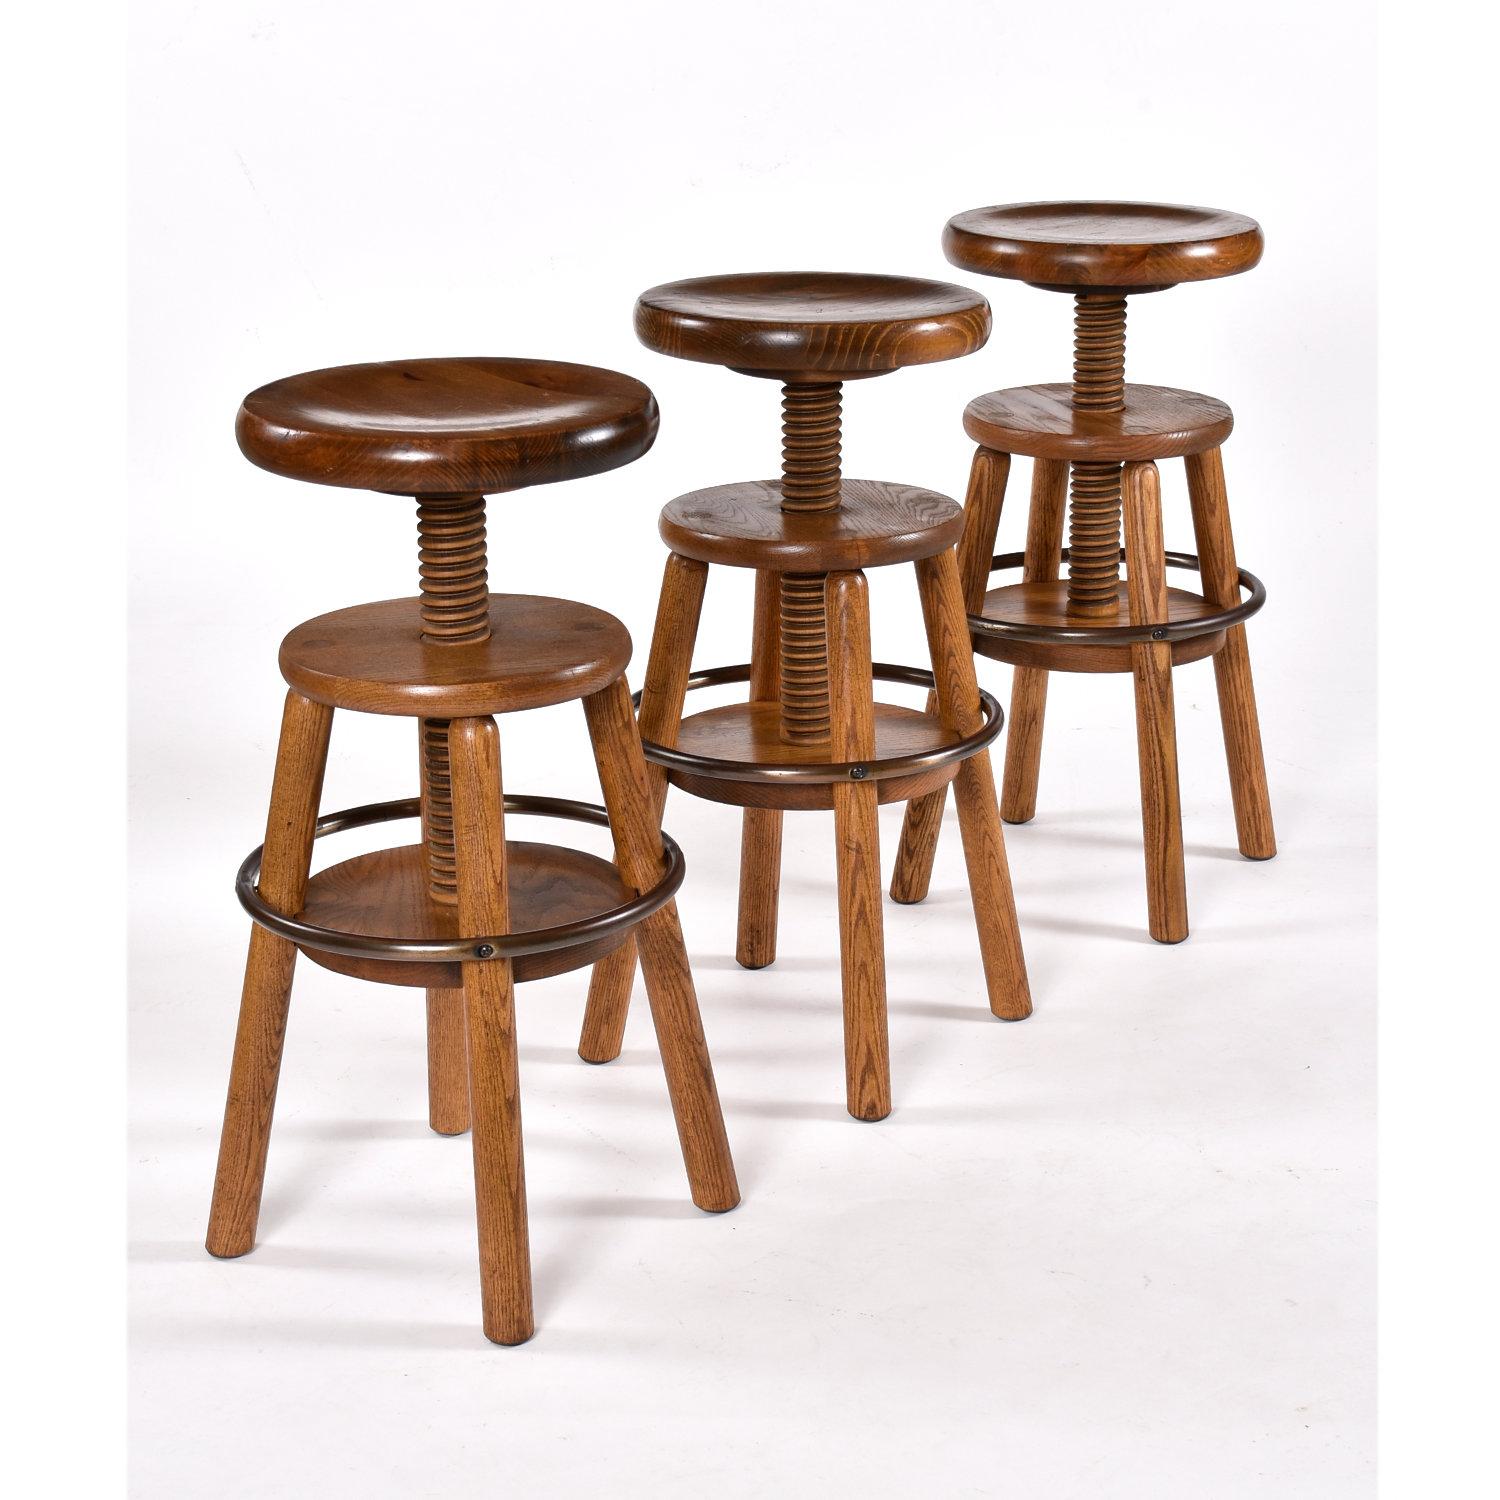 Stunning solid oak vintage bar stools with corkscrew design. The bar stools date from the late 1970s to 1980s. The solid oak construction is a hallmark of fine quality. These stools were beautifully crafted with the finest materials, everything is